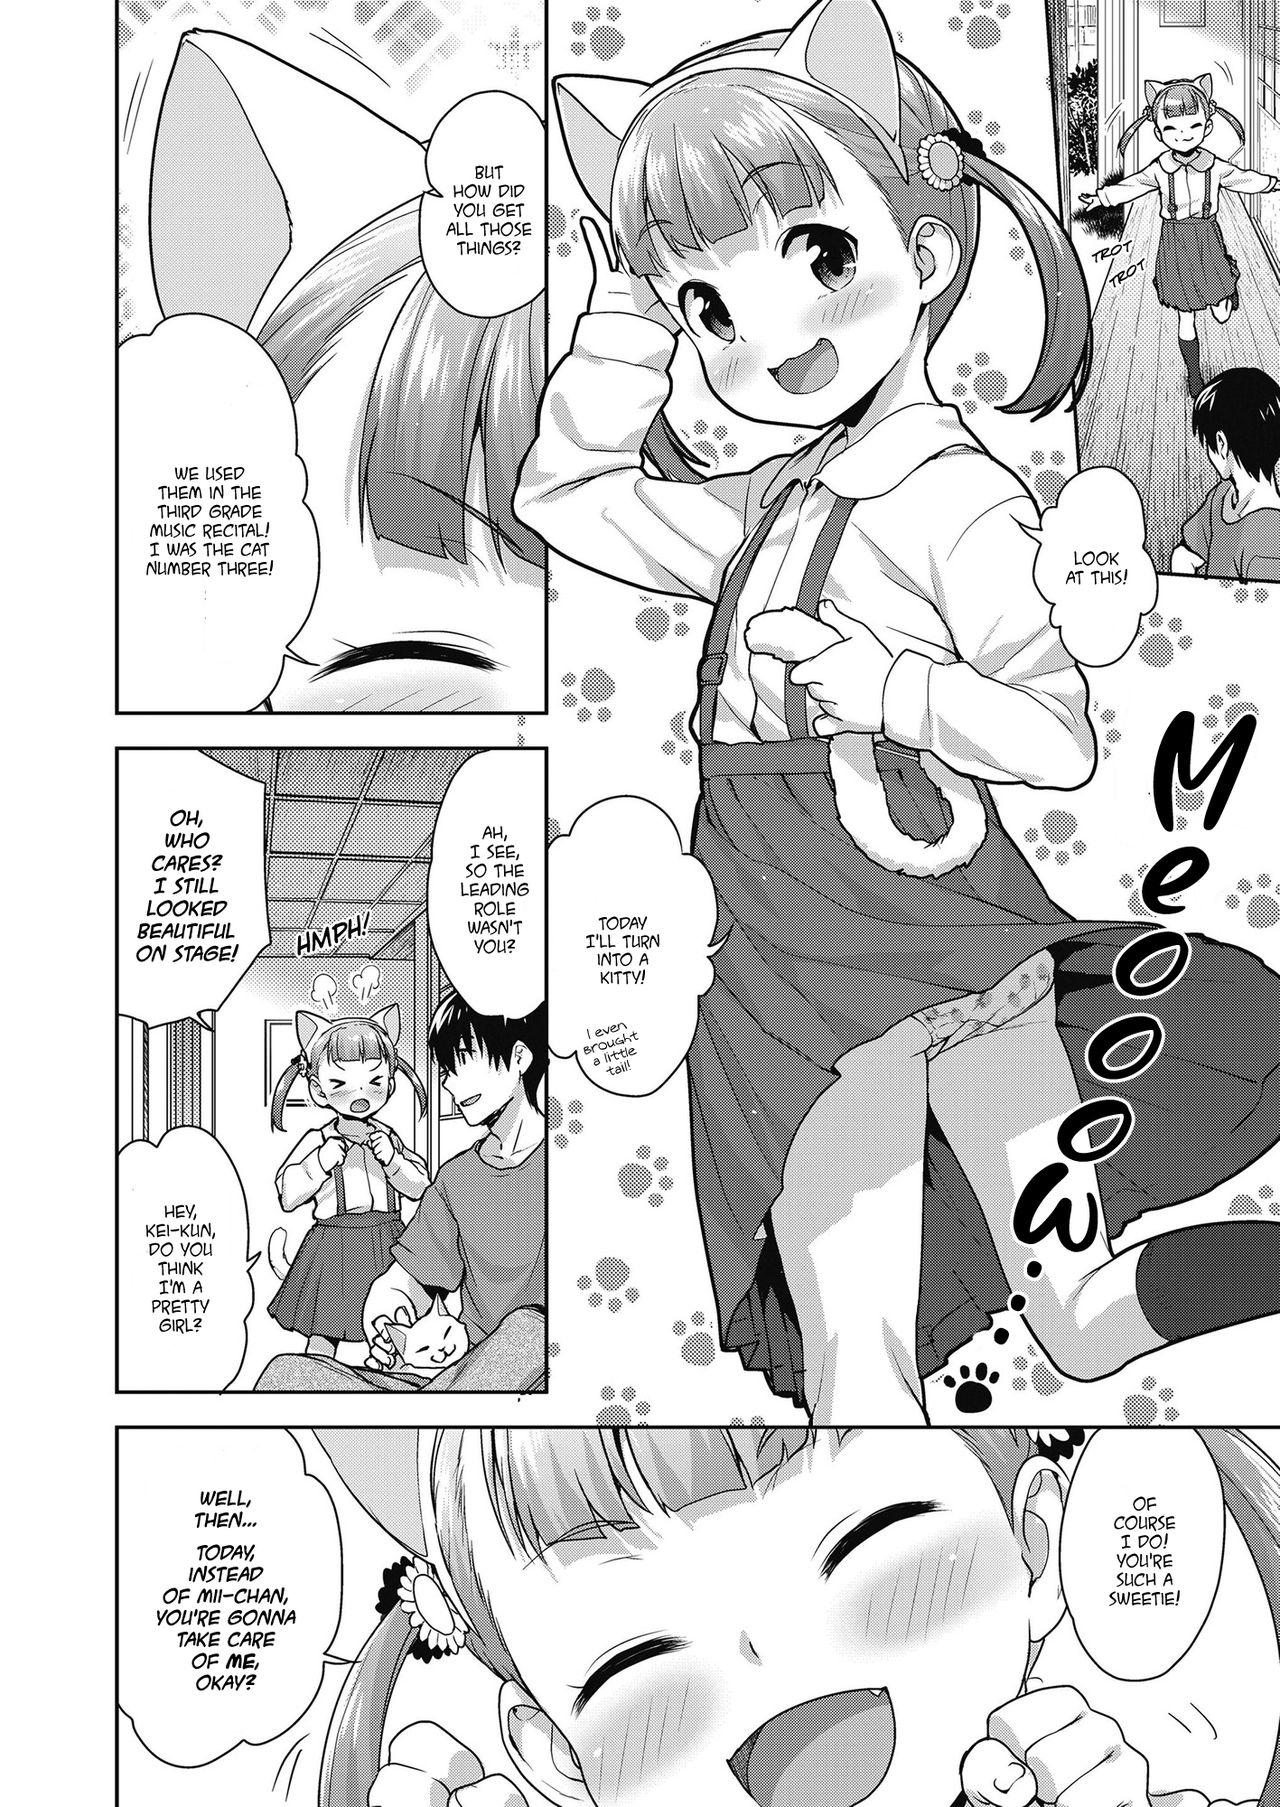 Boobs Koneko no Tsubomi | The Blooming of the Kitty Polla - Page 2